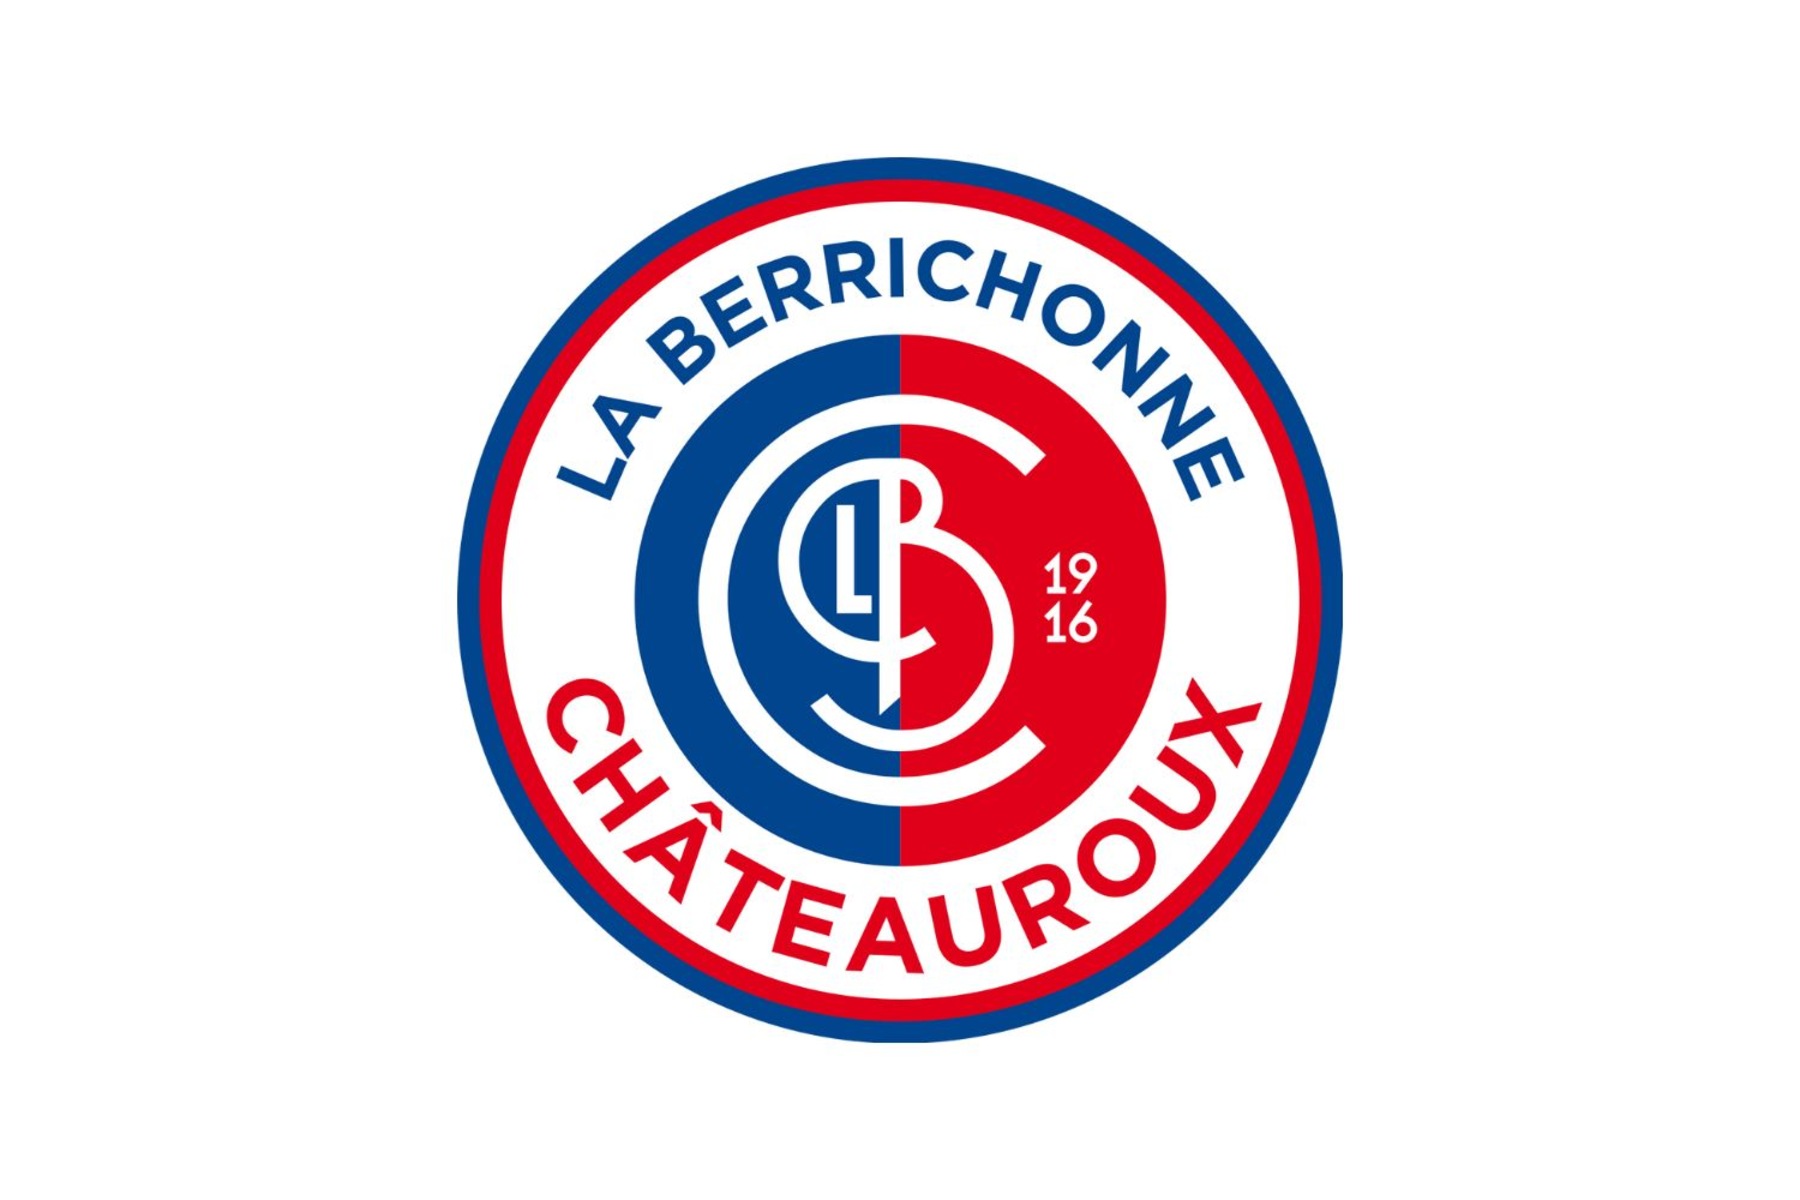 lb-chateauroux-23-football-club-facts